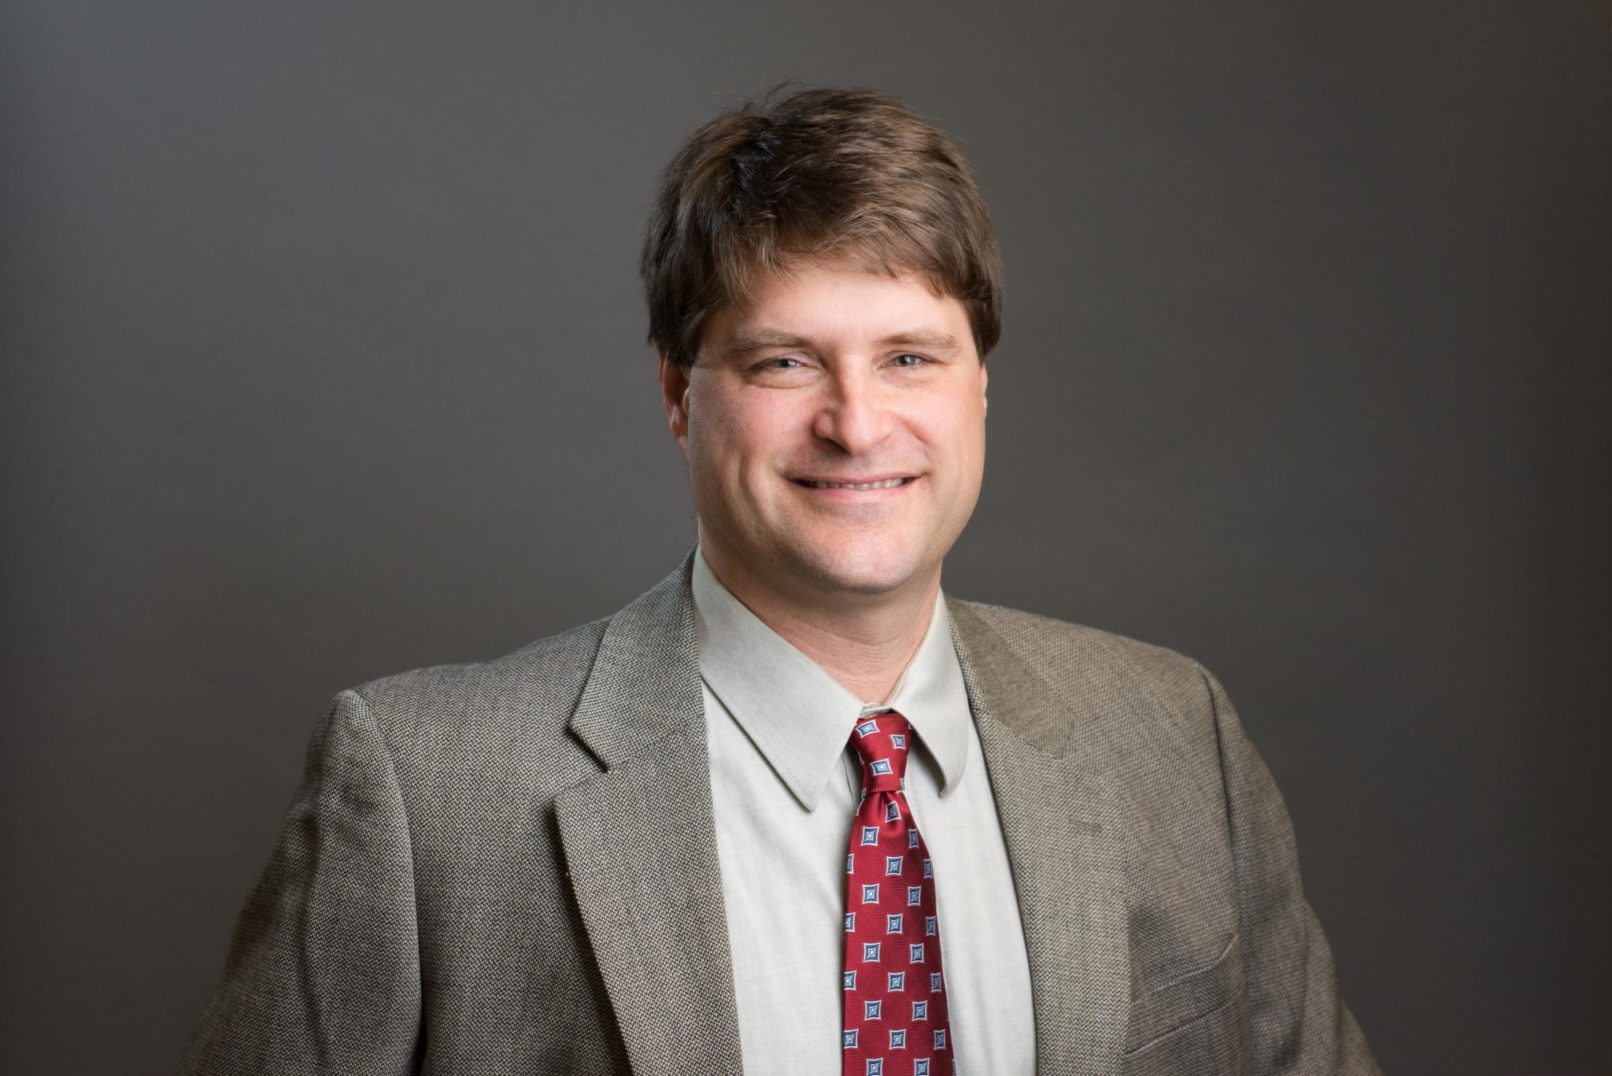 business headshot photo of male professional wetland scientist in a grey suit with a red tie.